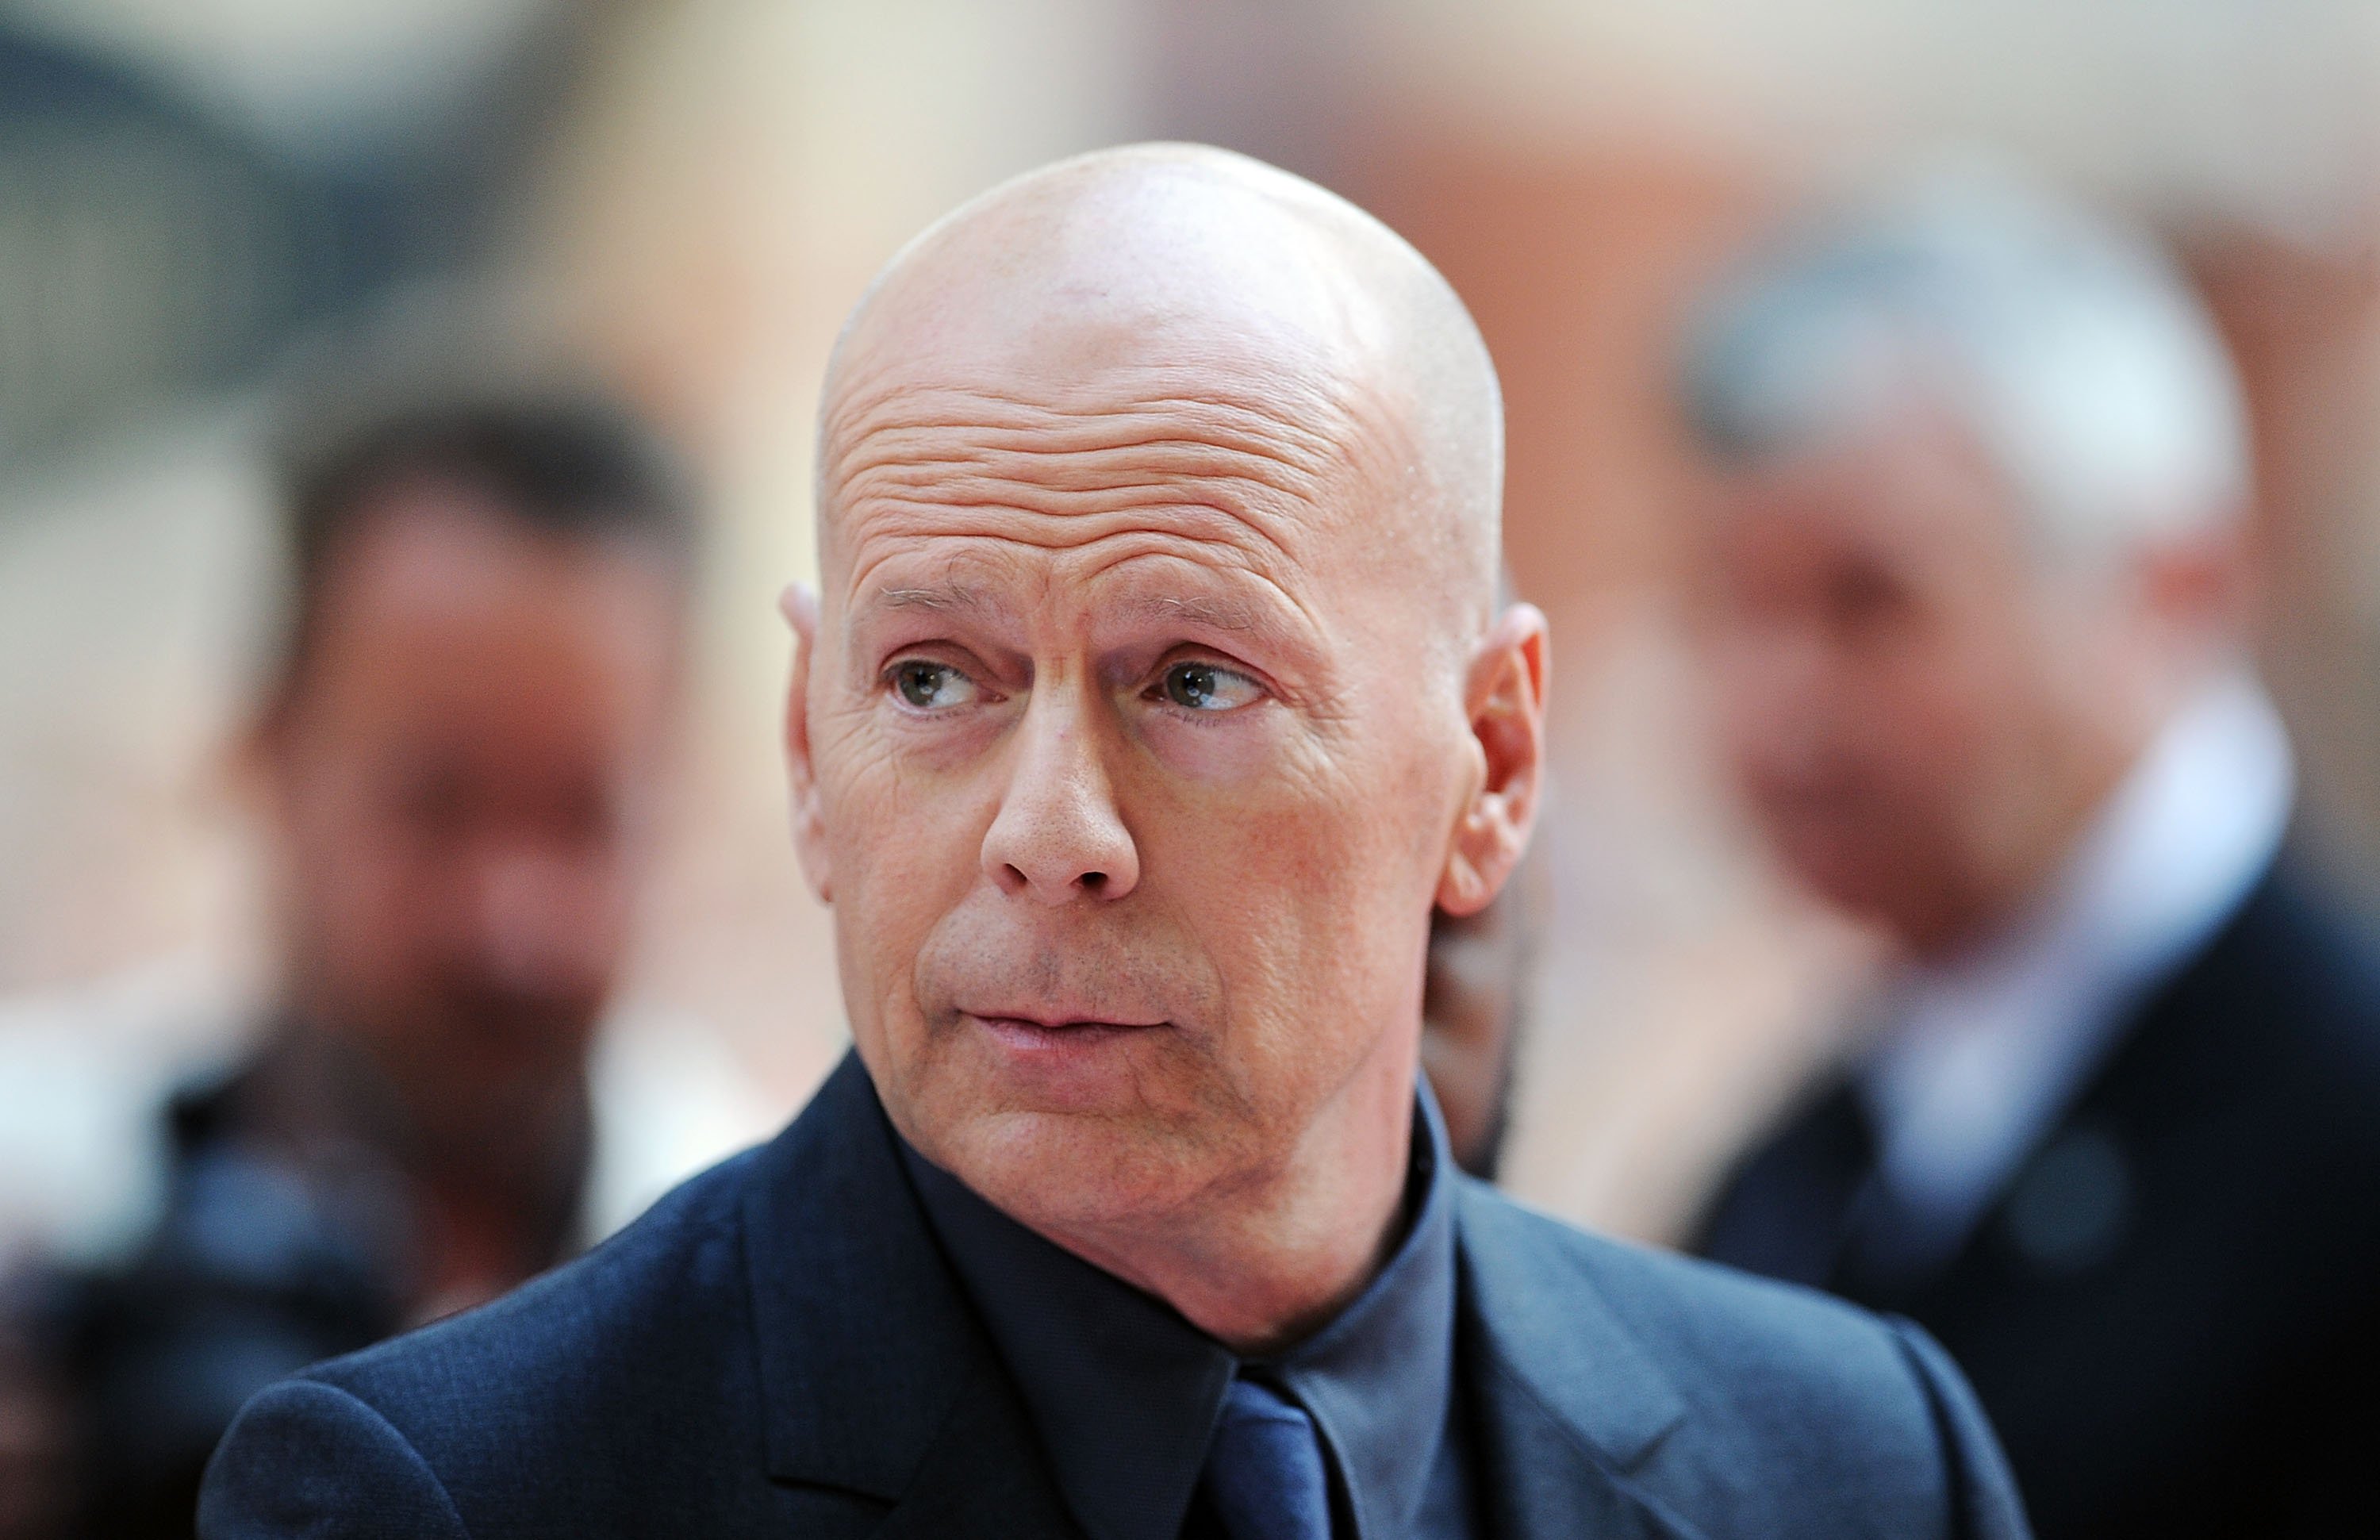 Bruce Willis attends the European Premiere of 'Red 2' at Empire Leicester Square on July 22, 2013 | Photo: GettyImages